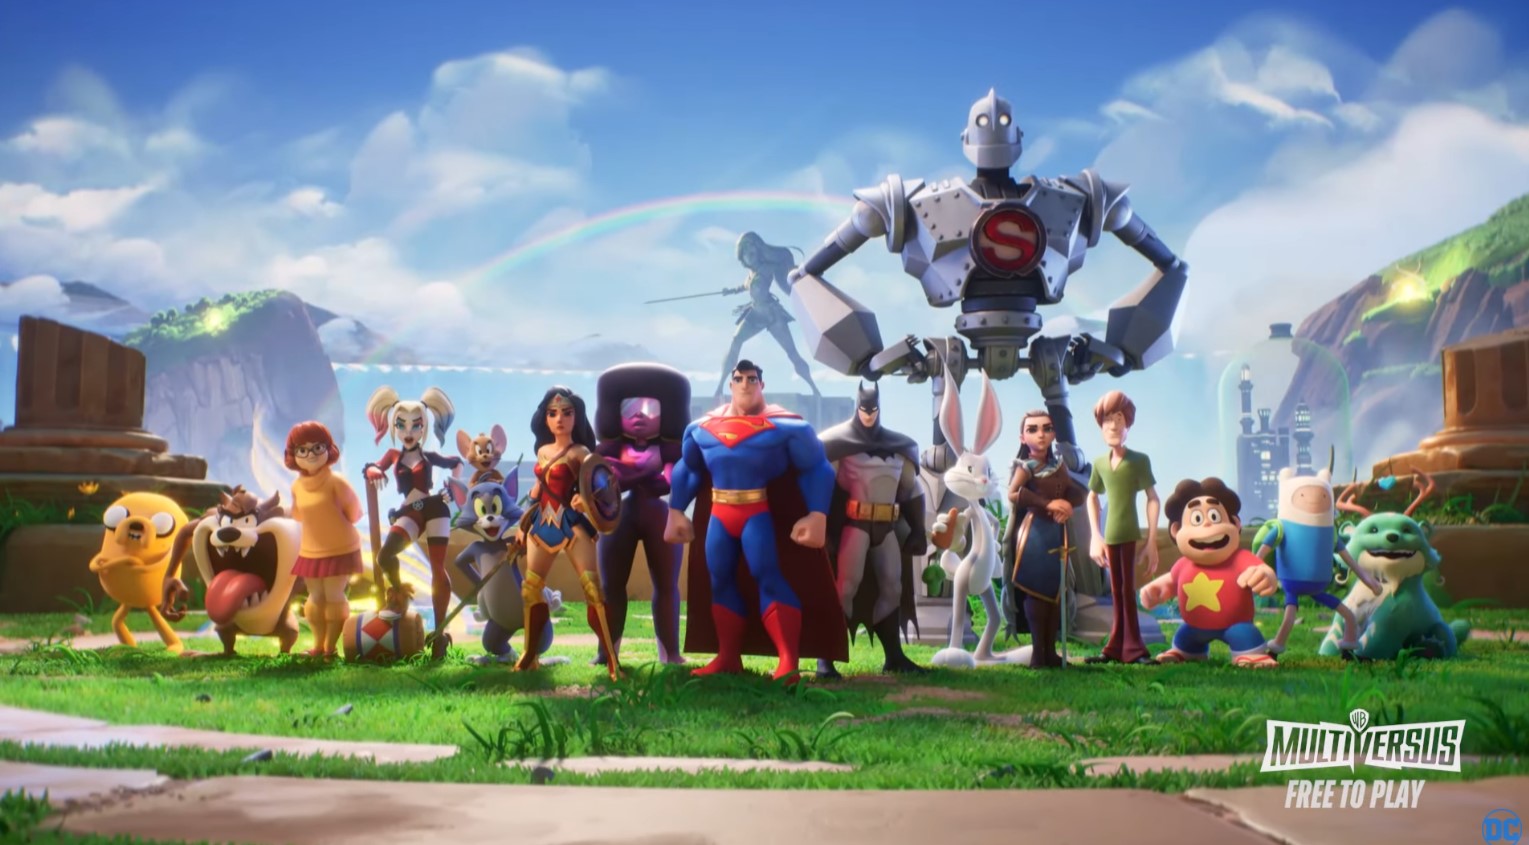 Warner Bros. Games' new videogame 'MultiVersus' will let players